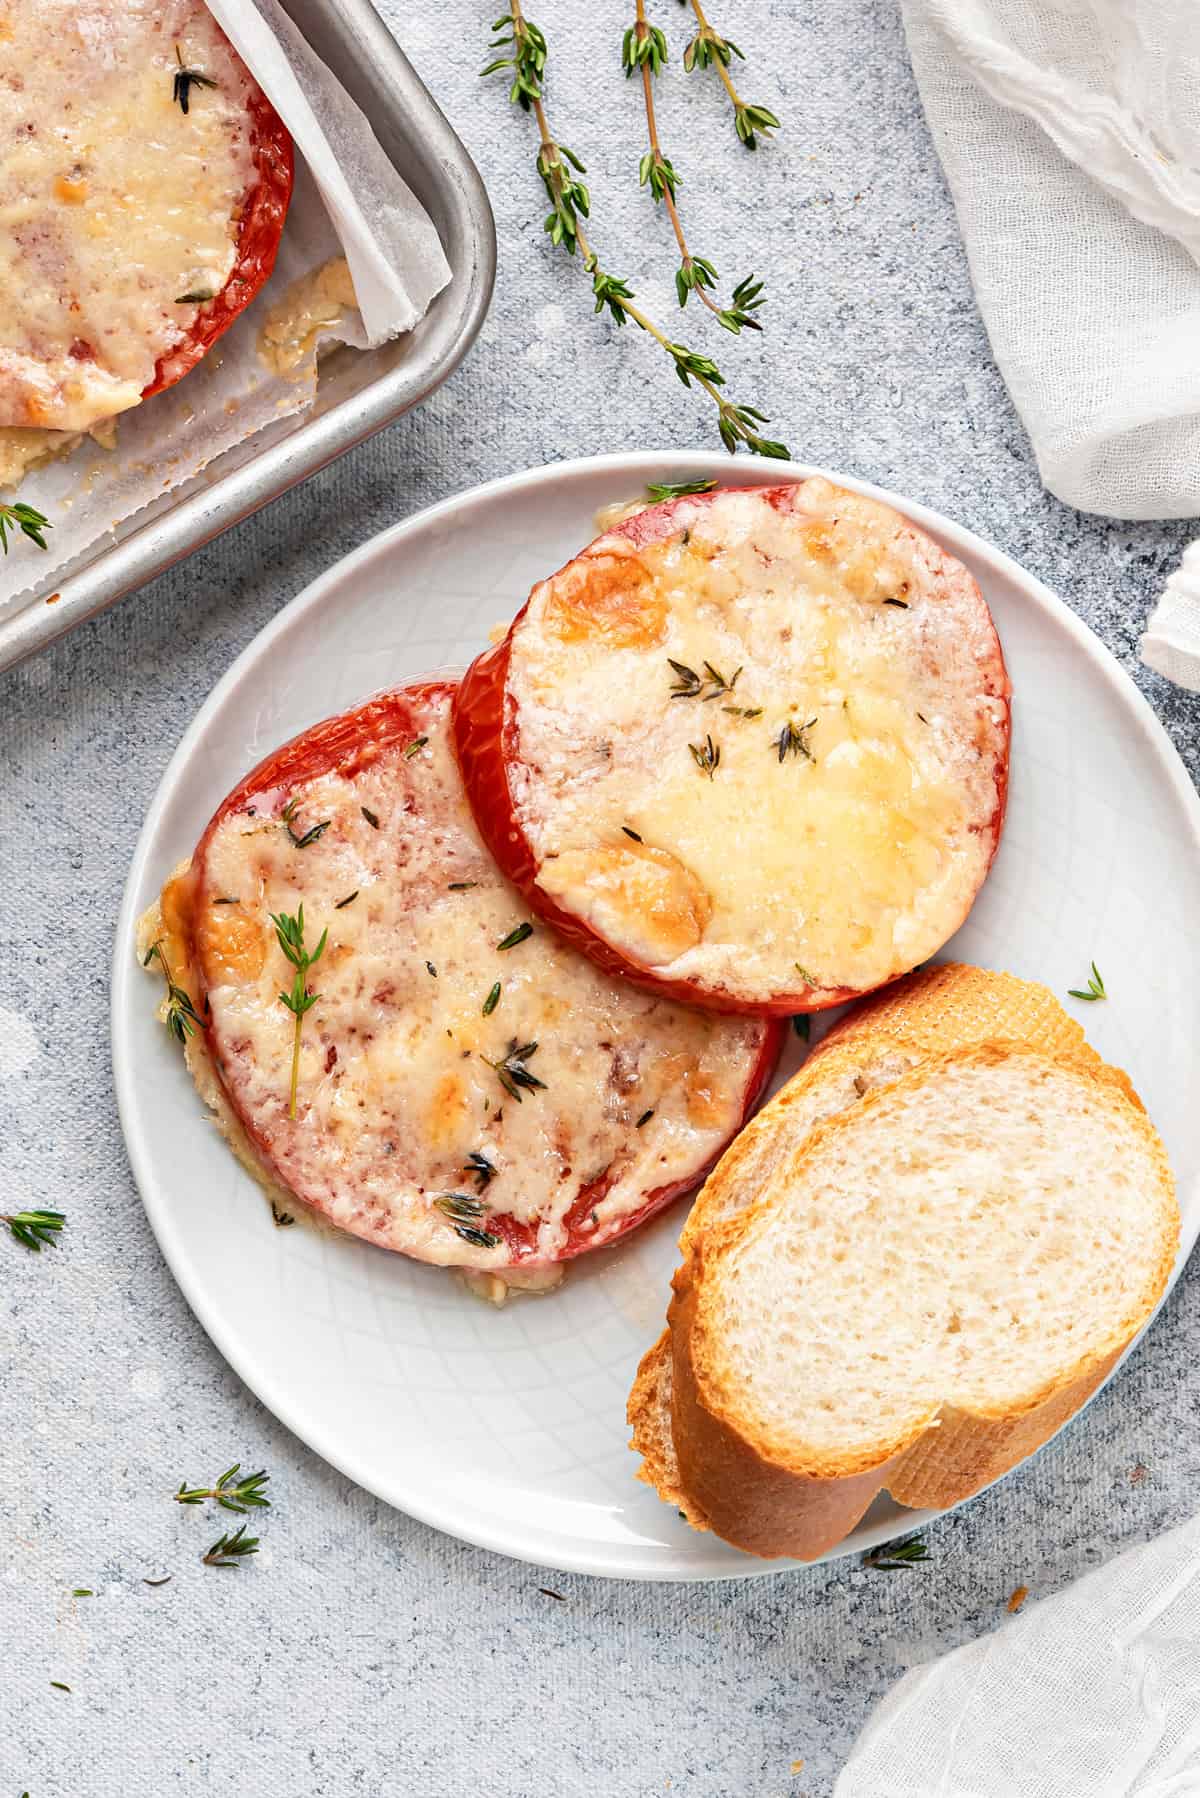 Two slices of cheese baked tomato served on a white plate with bread for breakfast.